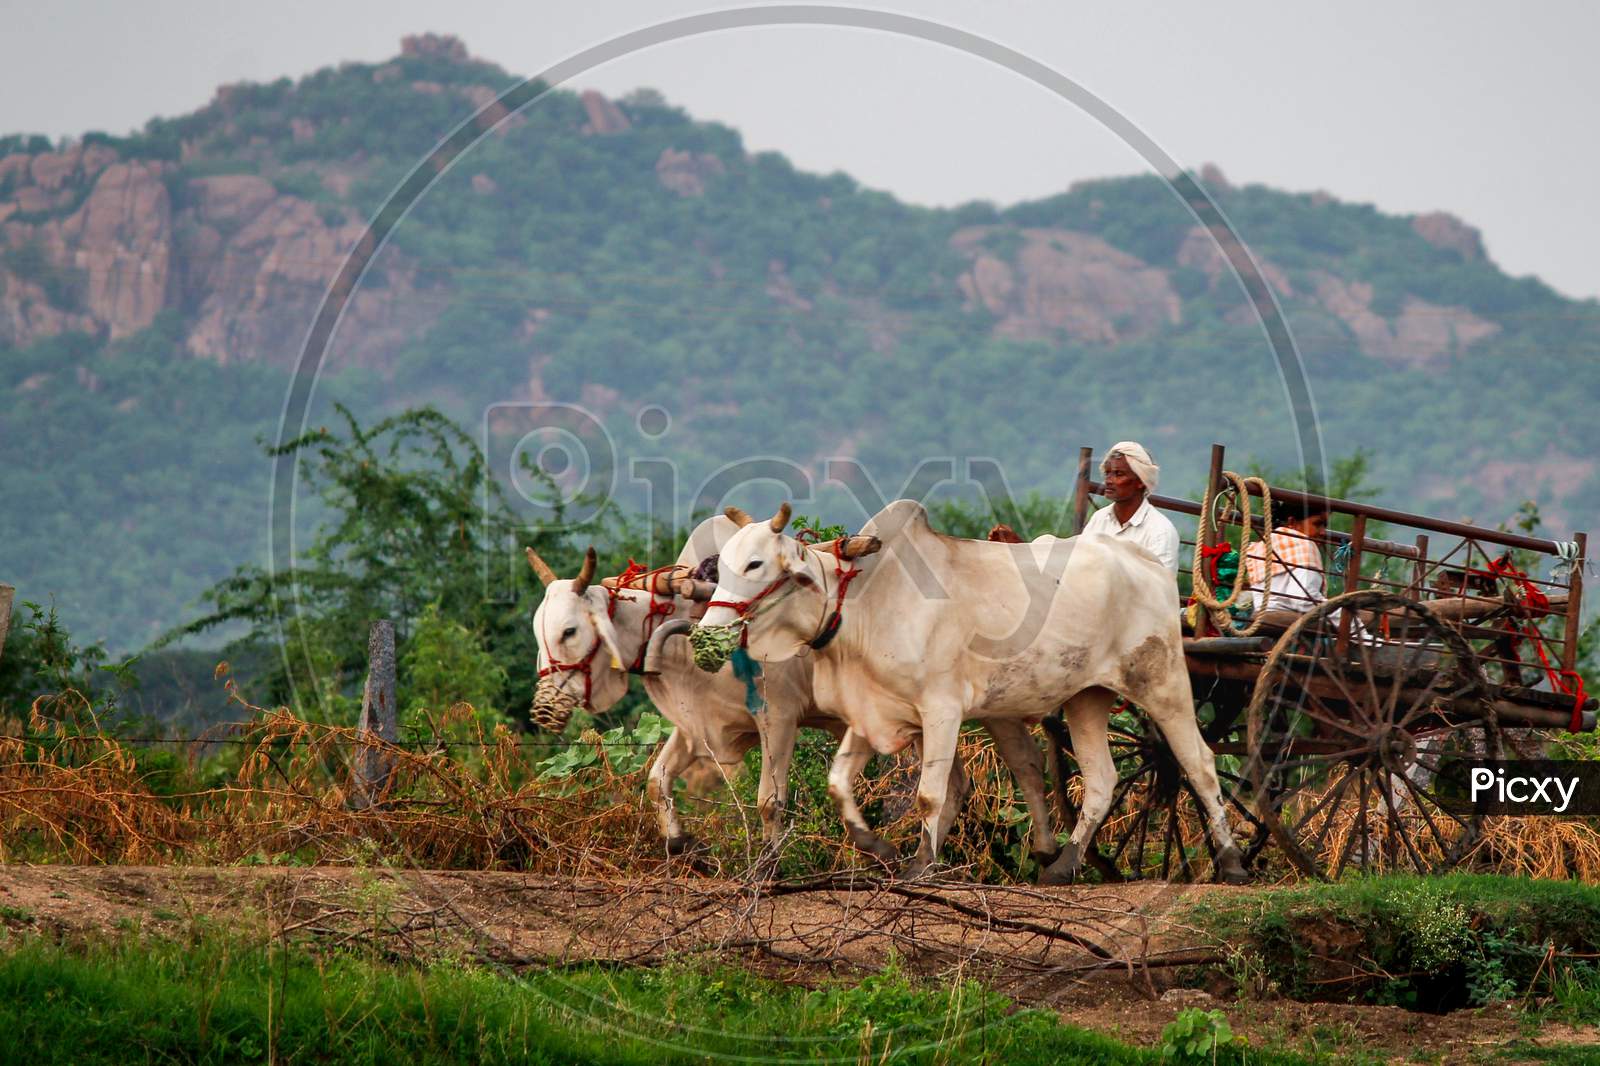 Villagers going home on bullock cart